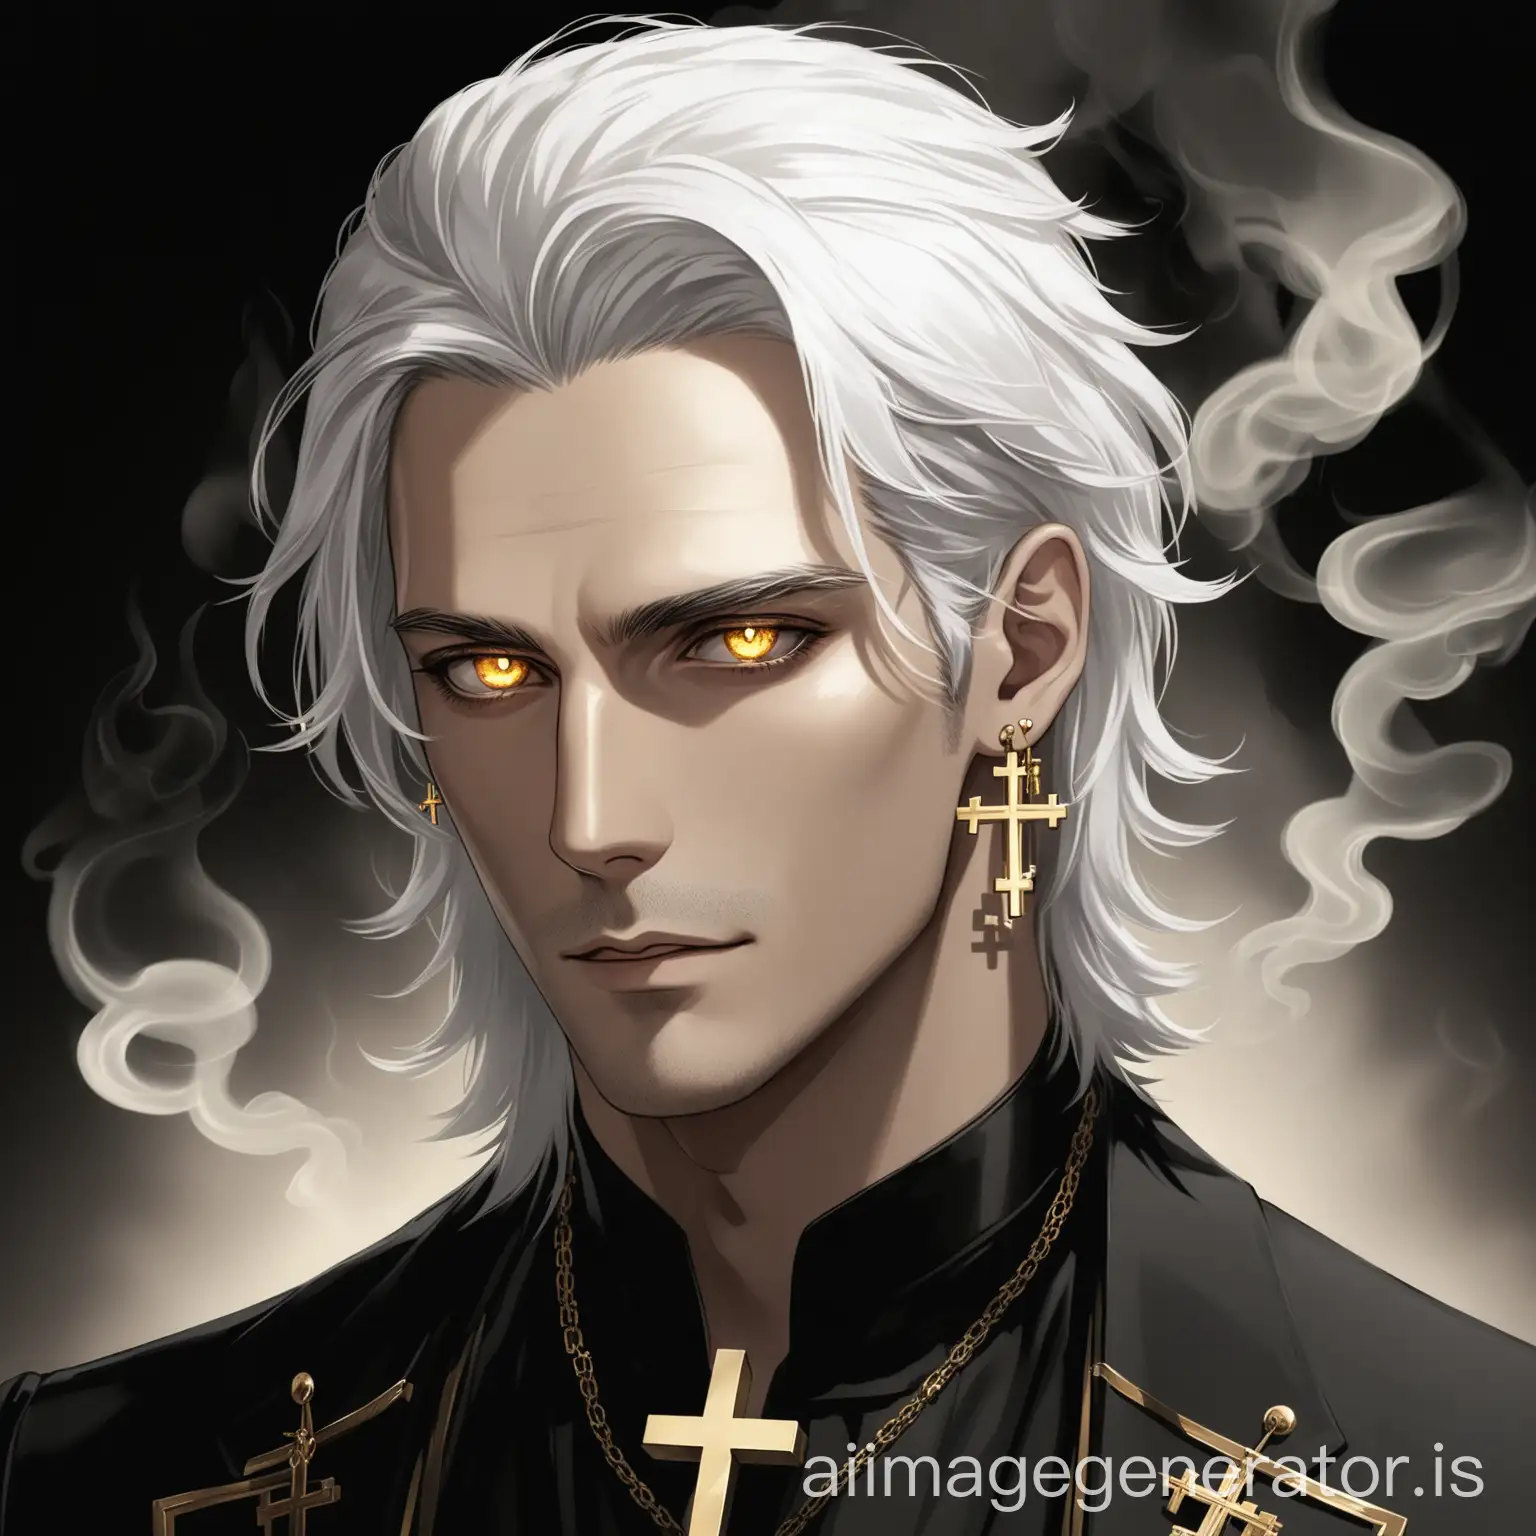 A handsome man with white hair and golden eyes with a smoke and a cross earring